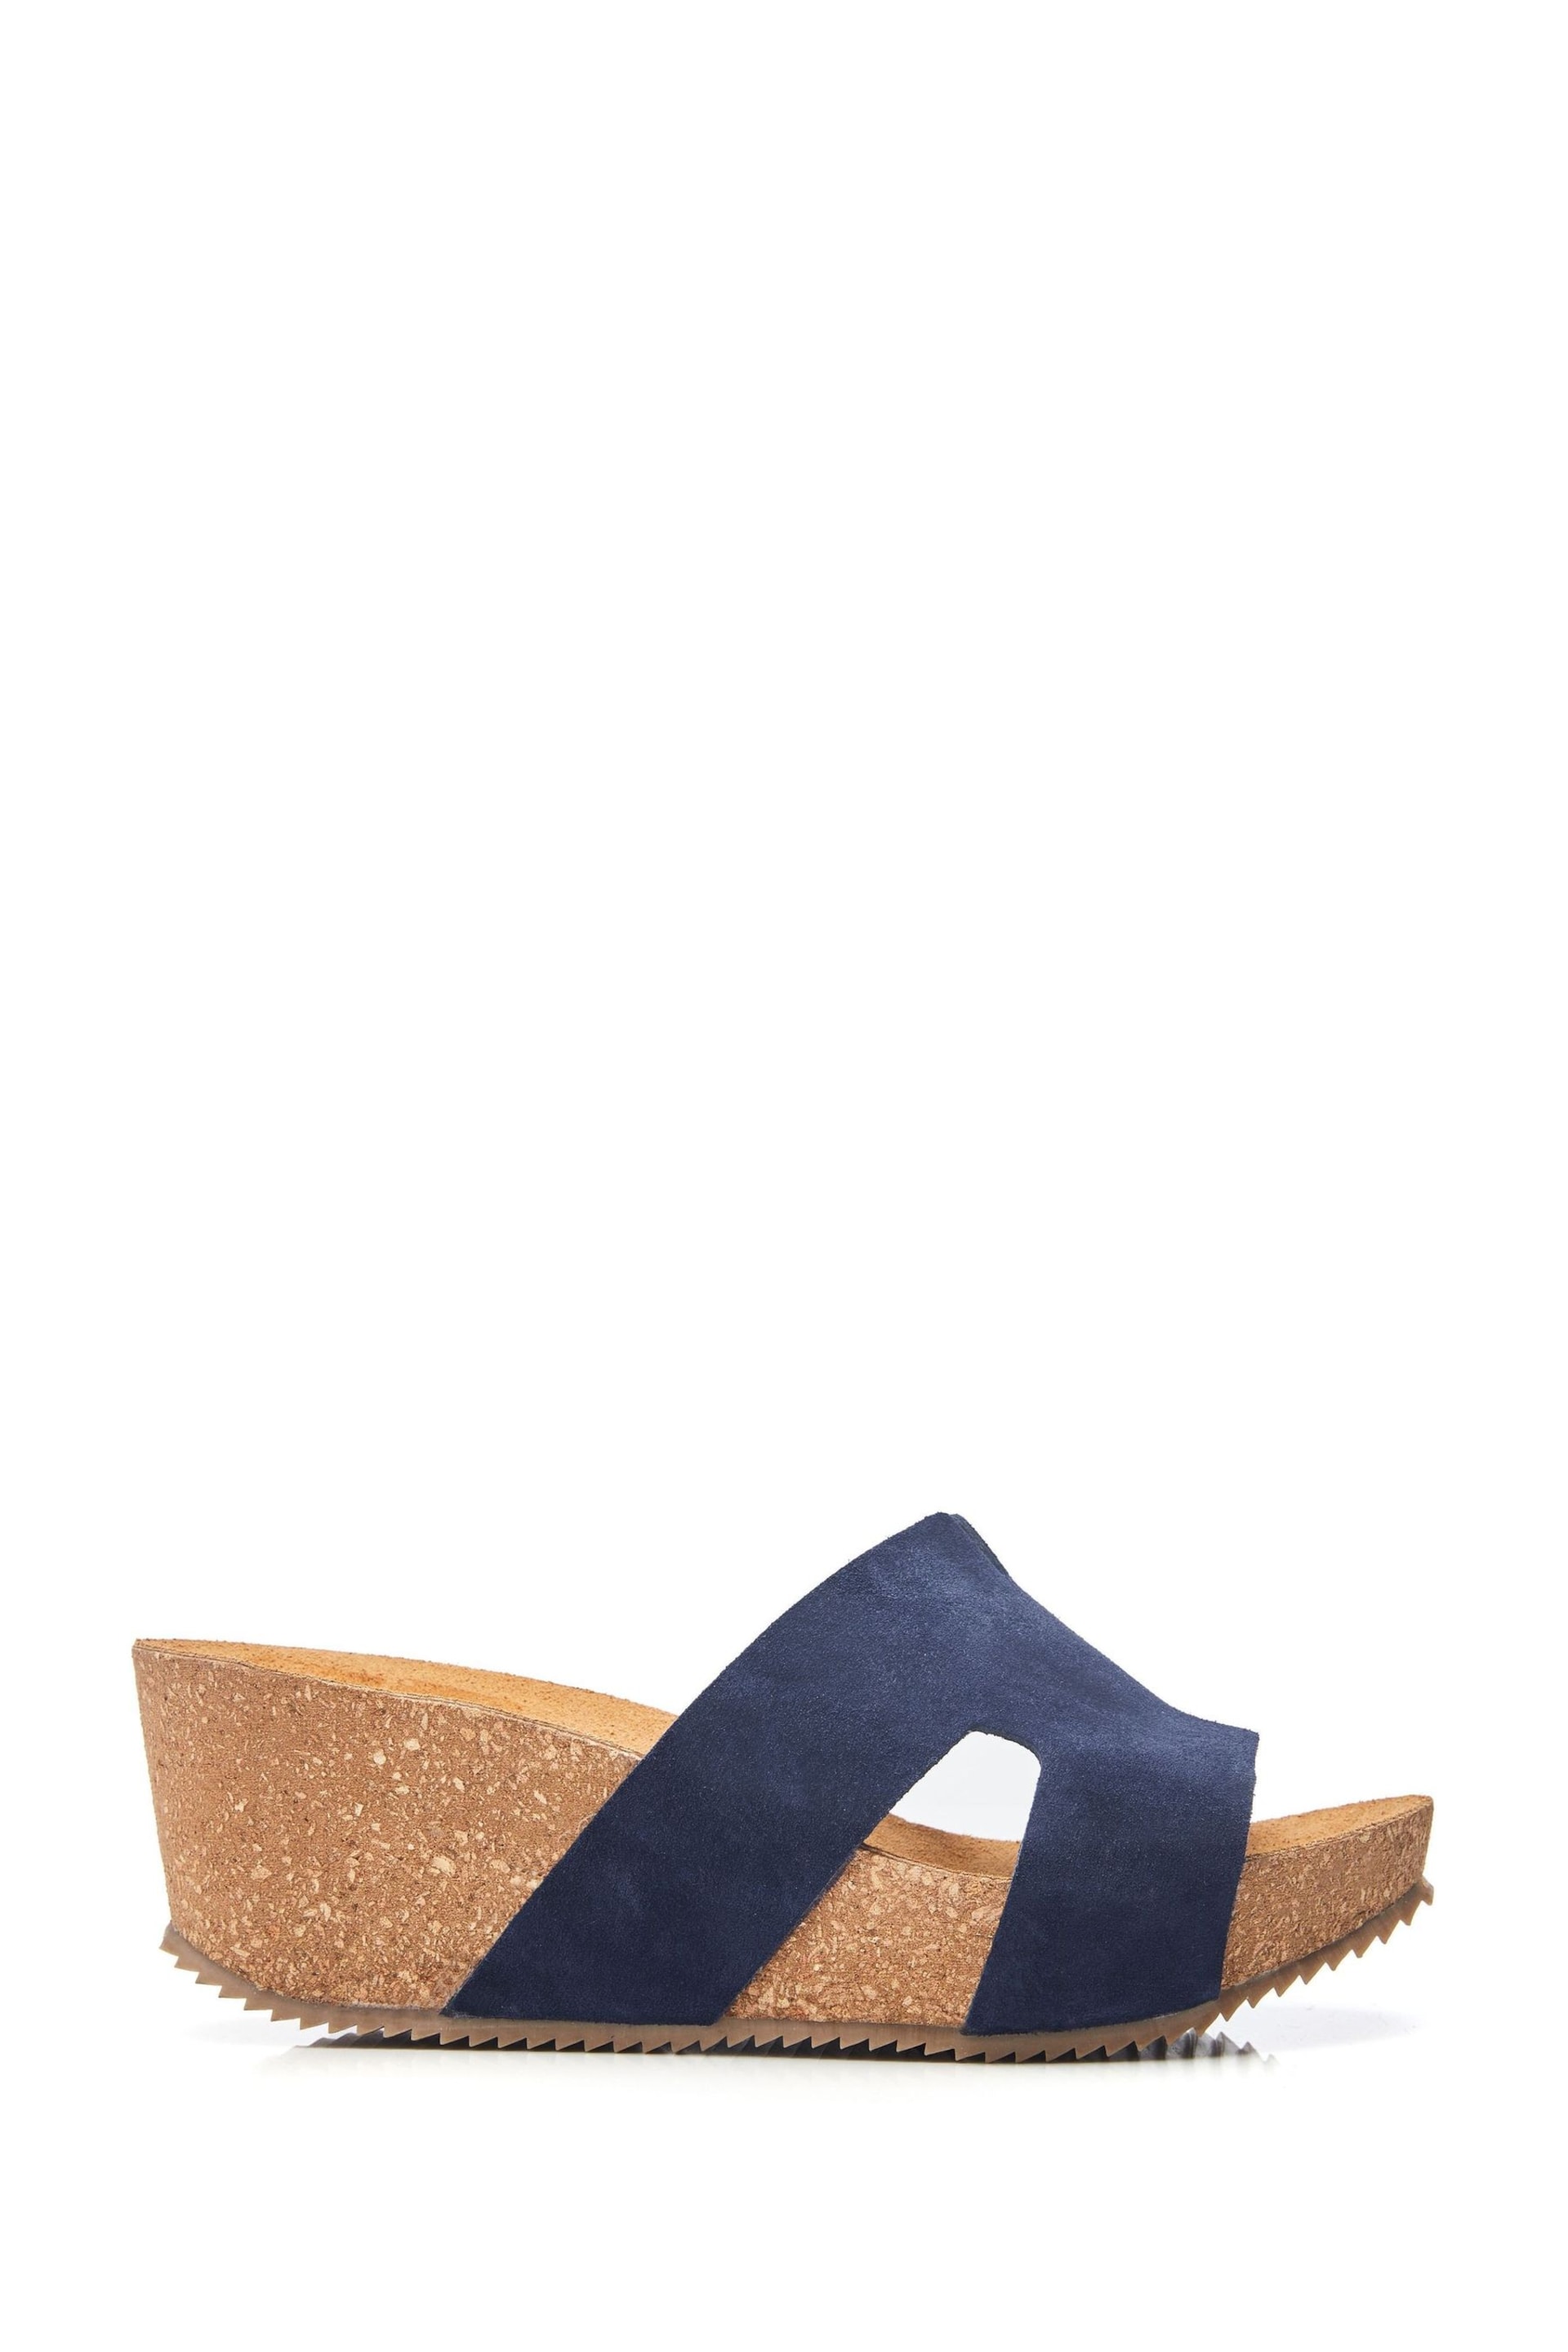 Moda in Pelle Hollie H Band Mules Cork Wedges - Image 1 of 4